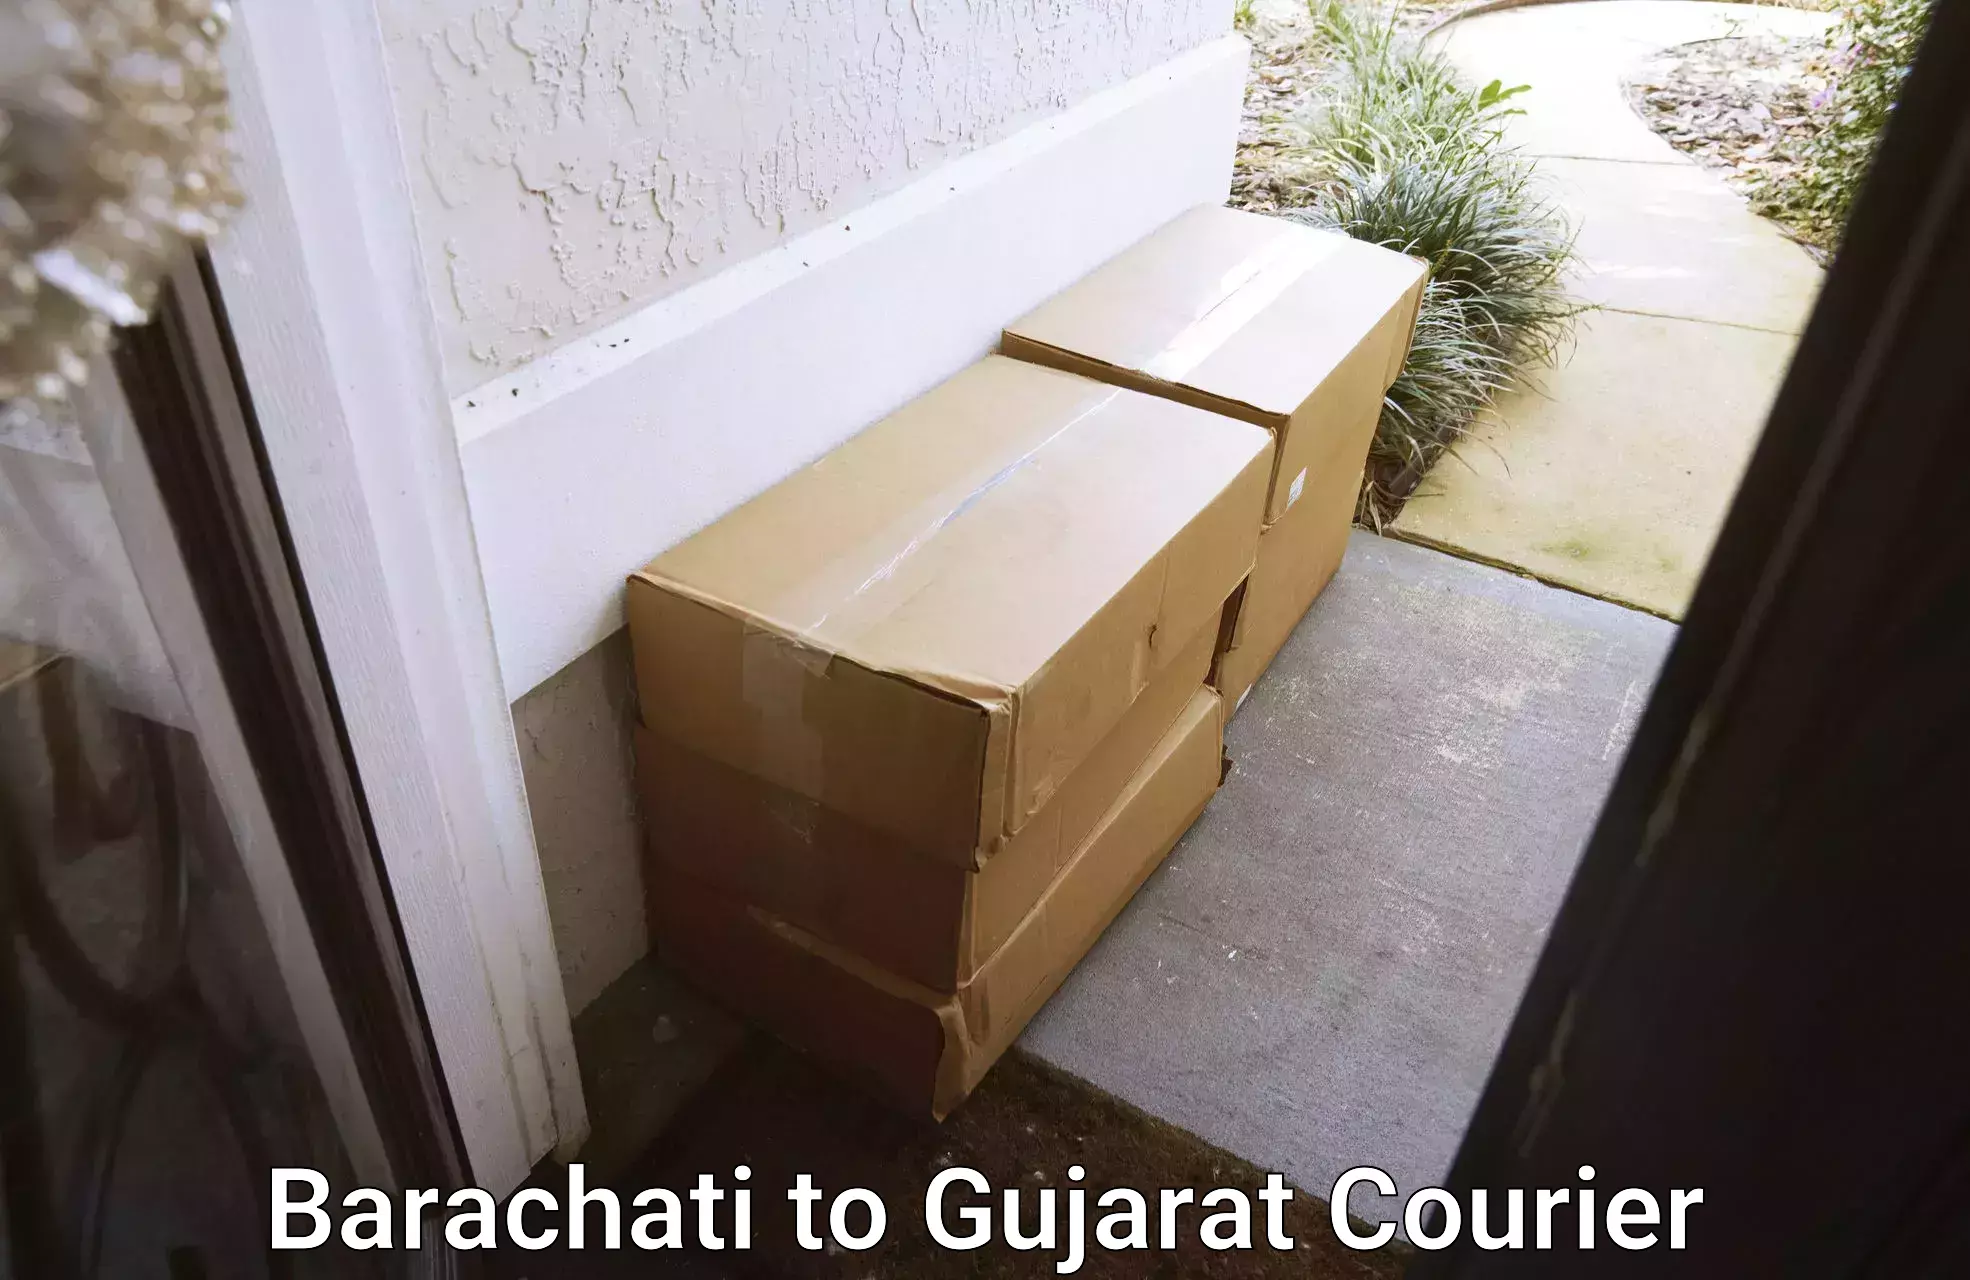 Furniture delivery service Barachati to Kachchh